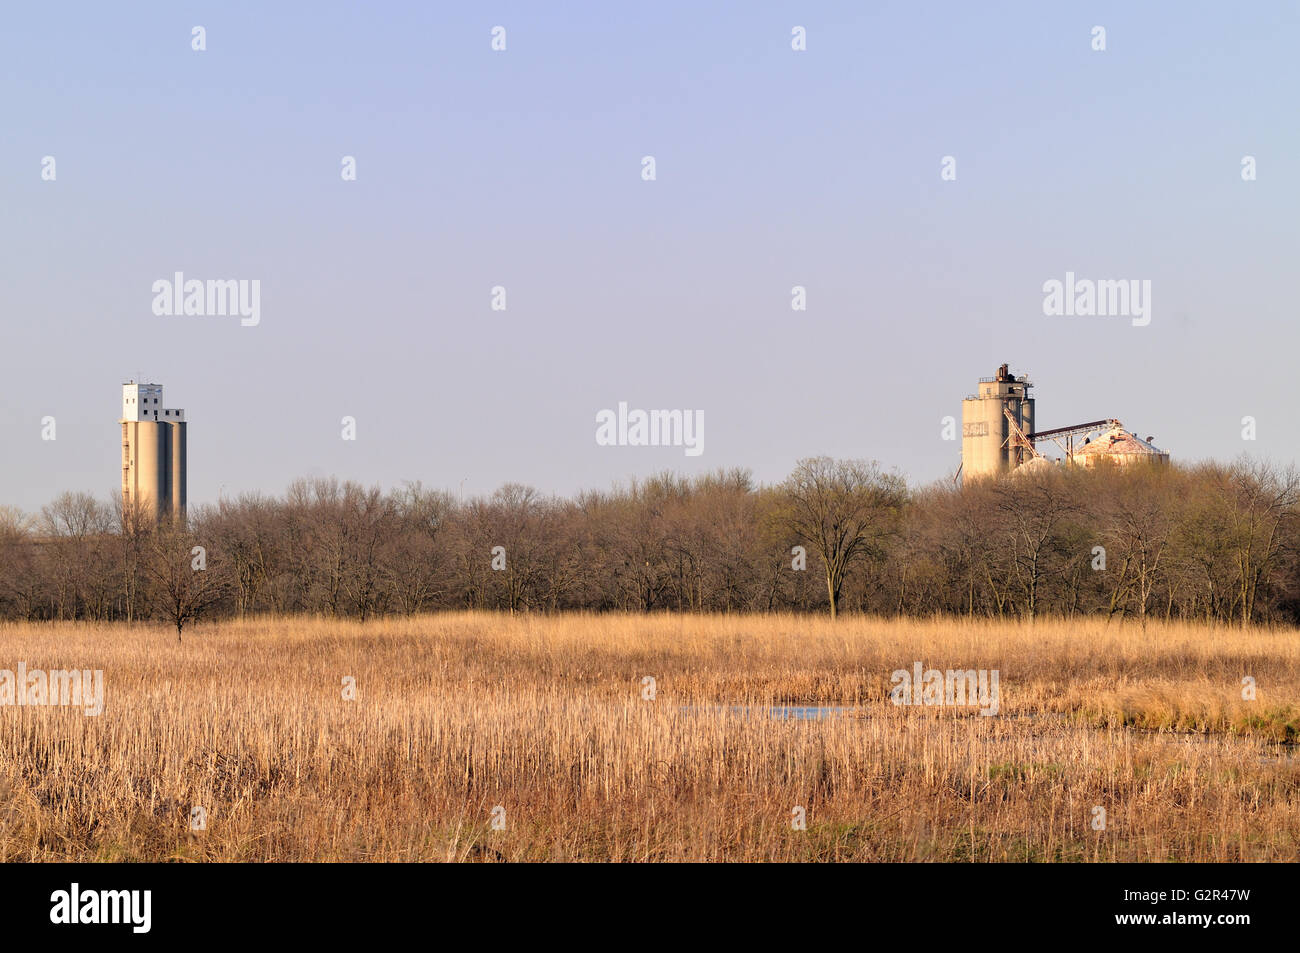 A protected natural area existing in close proximity to industry in Lockport, Illinois. Stock Photo